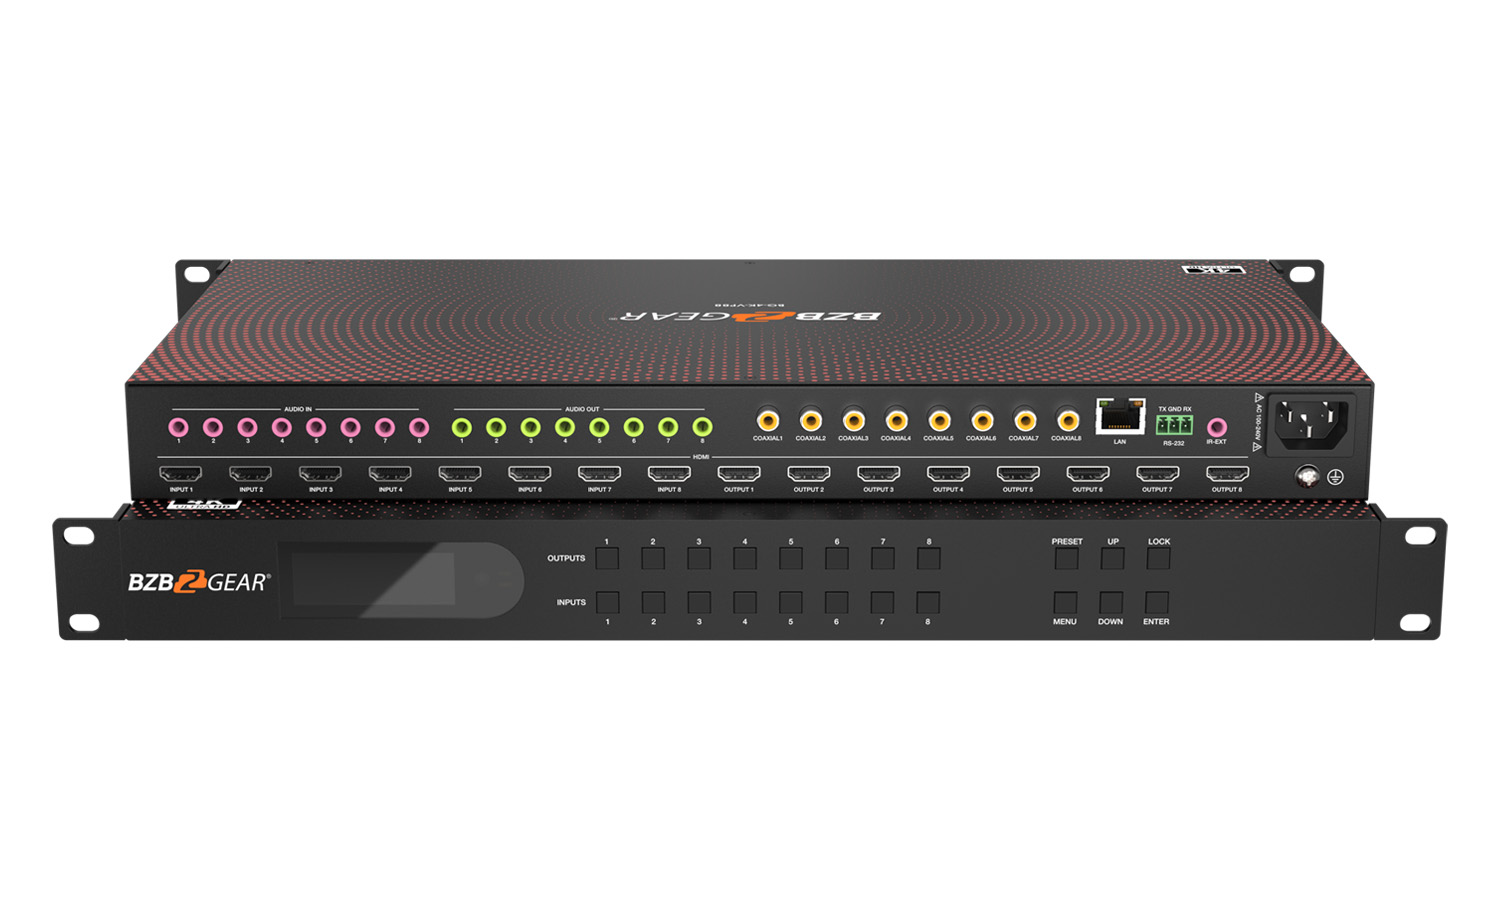 BG-4K-VP88 8x8 4K UHD Seamless HDMI Matrix Switcher/Video Wall Processor/MultiViewer with Scaler/IR/Audio/IP and RS-232 by BZBGEAR